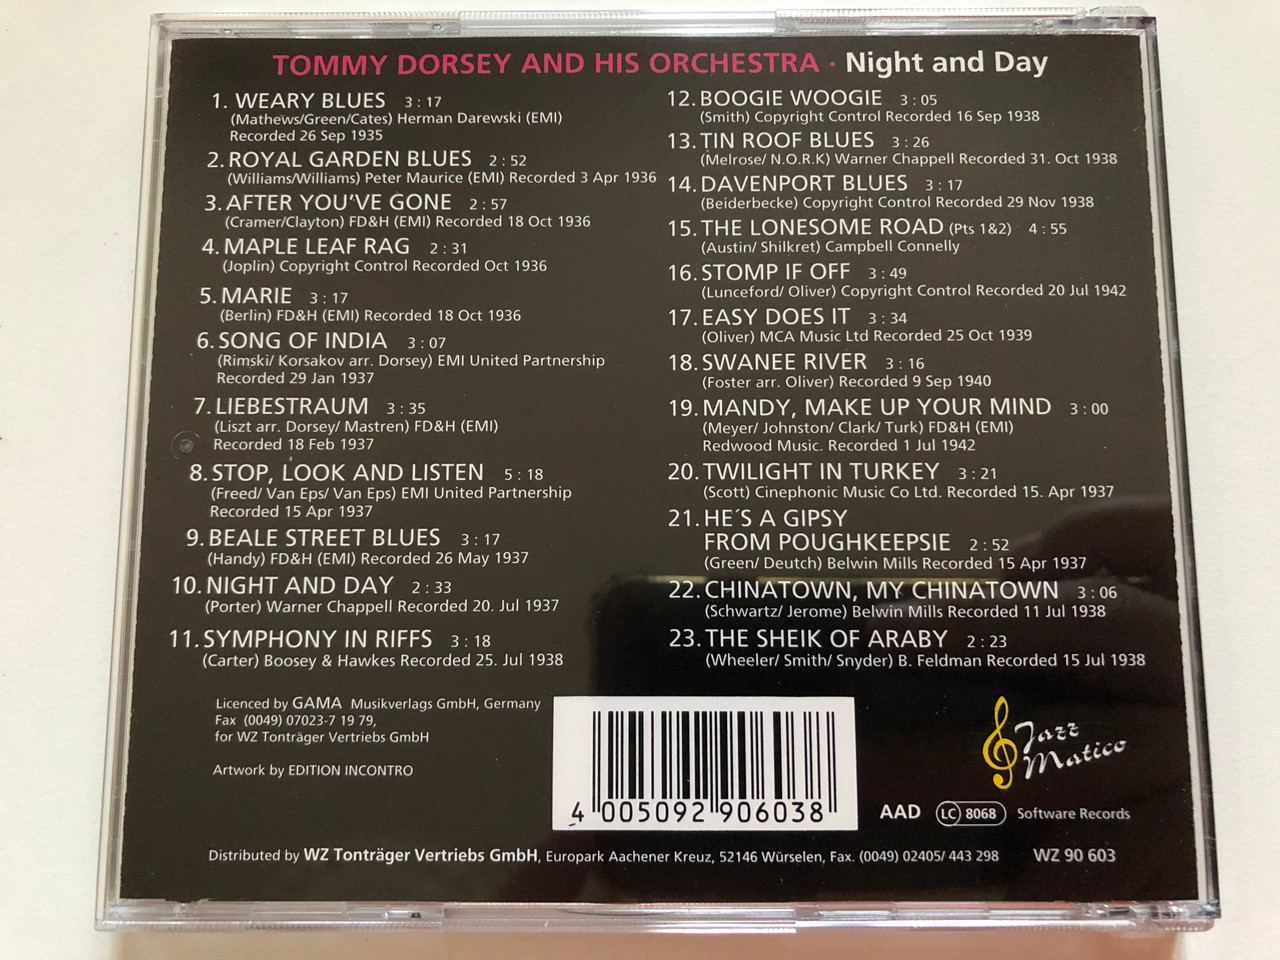 https://cdn10.bigcommerce.com/s-62bdpkt7pb/products/0/images/259190/Special_Jazz_Collection_-_Tommy_Dorsey_and_his_Orchestra_-_Night_And_Day_Weary_Blues_After_Youve_Gone_Royal_Garden_Blues_Maple_Leaf_Rag_Marie_Song_Of_India..._Digital_Mastering_WZ_3__89979.1669116354.1280.1280.JPG?c=2&_gl=1*tt71nf*_ga*MjA2NTIxMjE2MC4xNTkwNTEyNTMy*_ga_WS2VZYPC6G*MTY2OTEwODAwNS42MzcuMS4xNjY5MTE2MzE4LjYwLjAuMA..